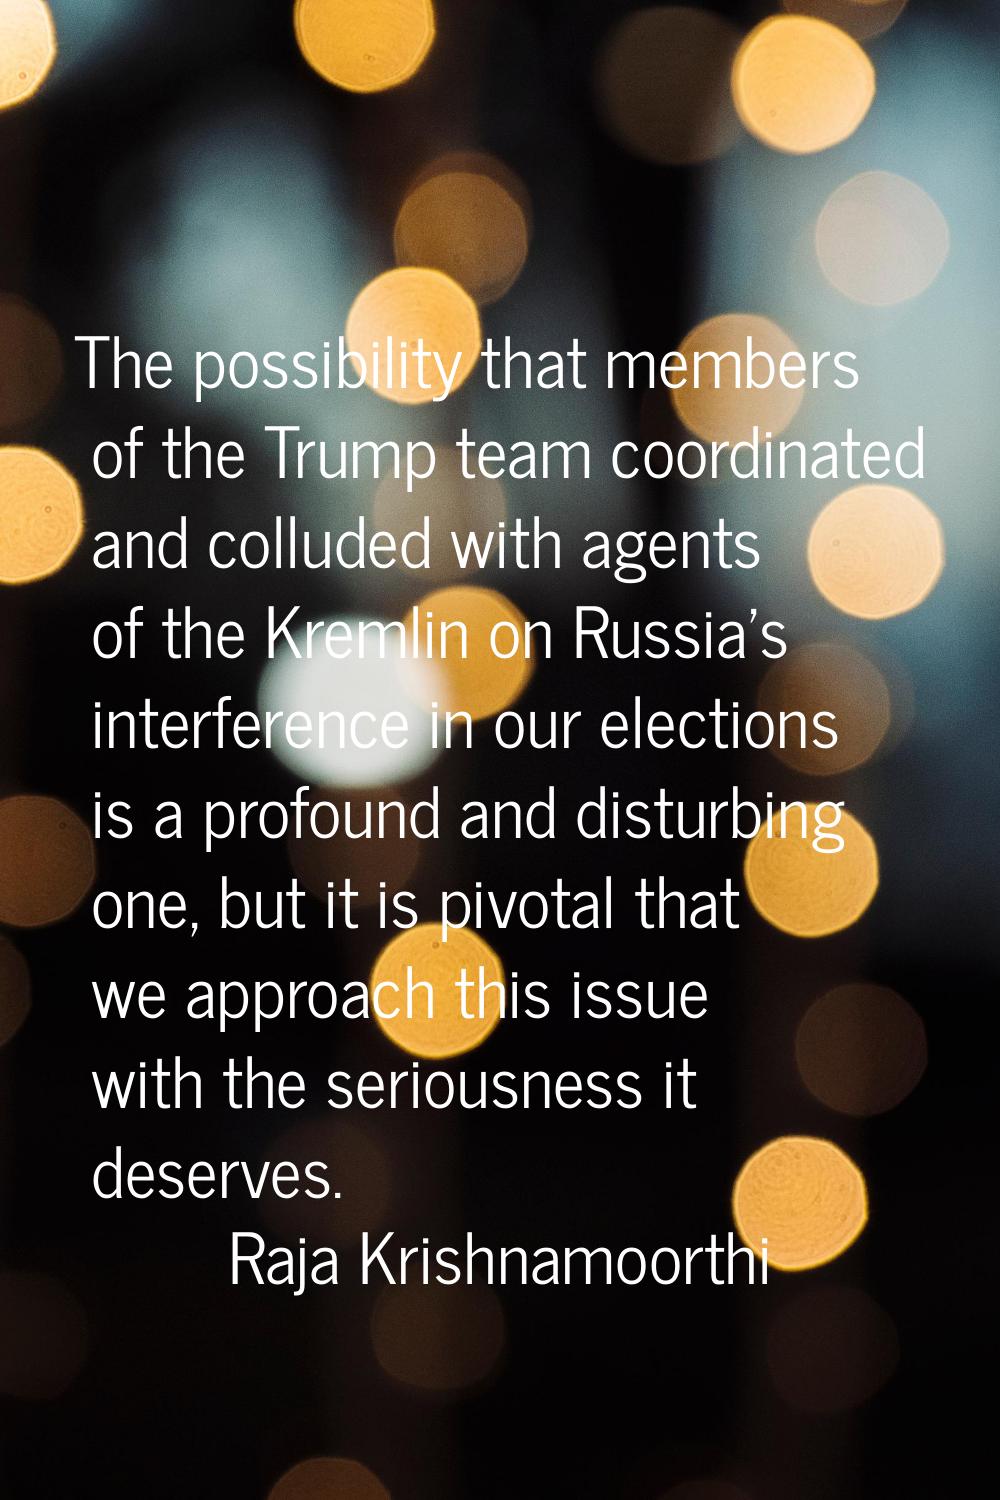 The possibility that members of the Trump team coordinated and colluded with agents of the Kremlin 